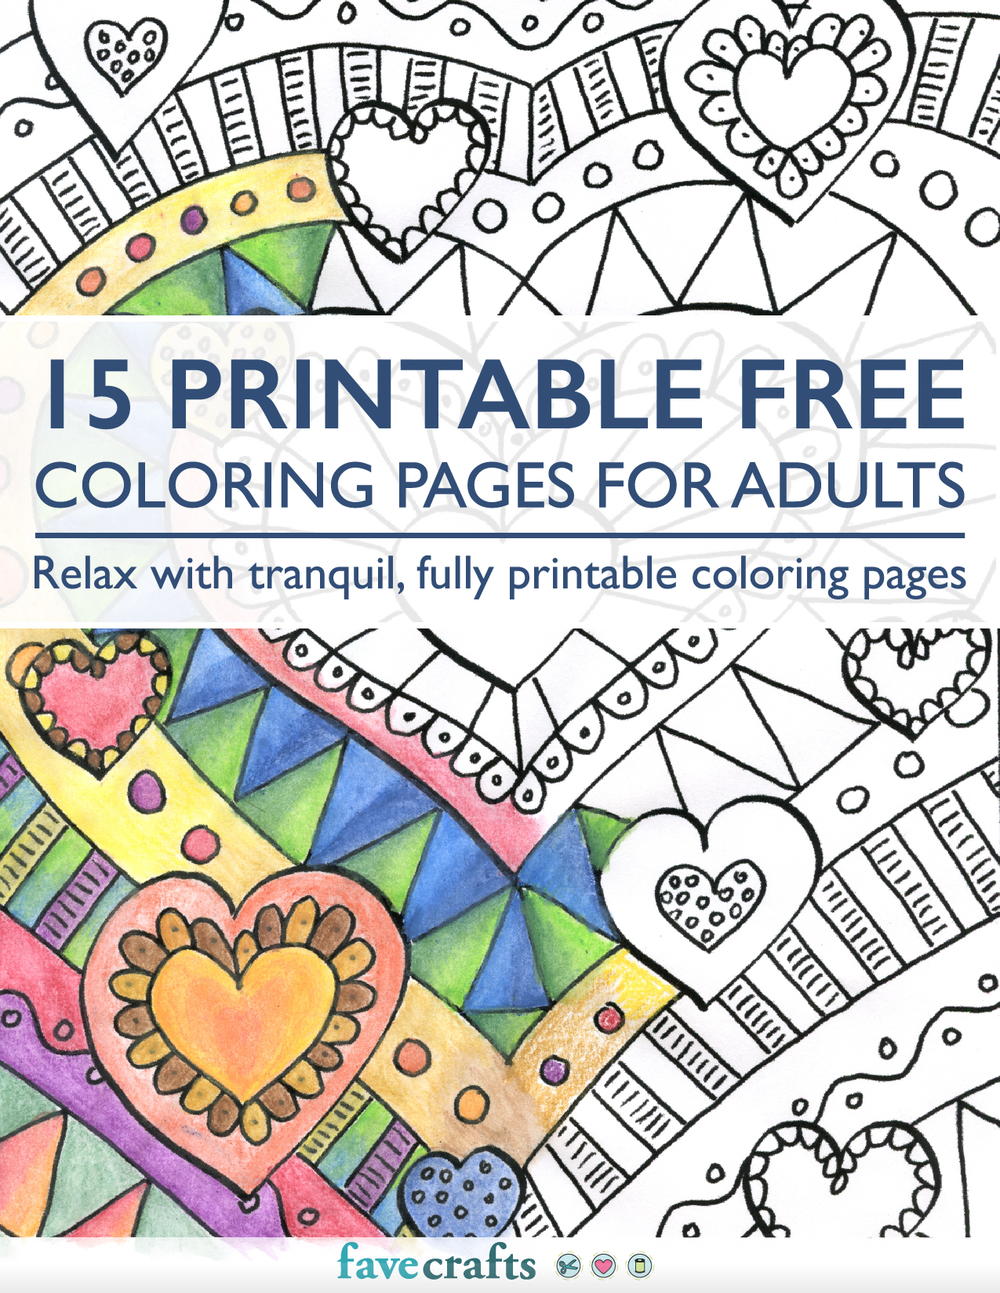 15 Printable Free Coloring Pages for Adults free eBook Extra 1000 ID v=